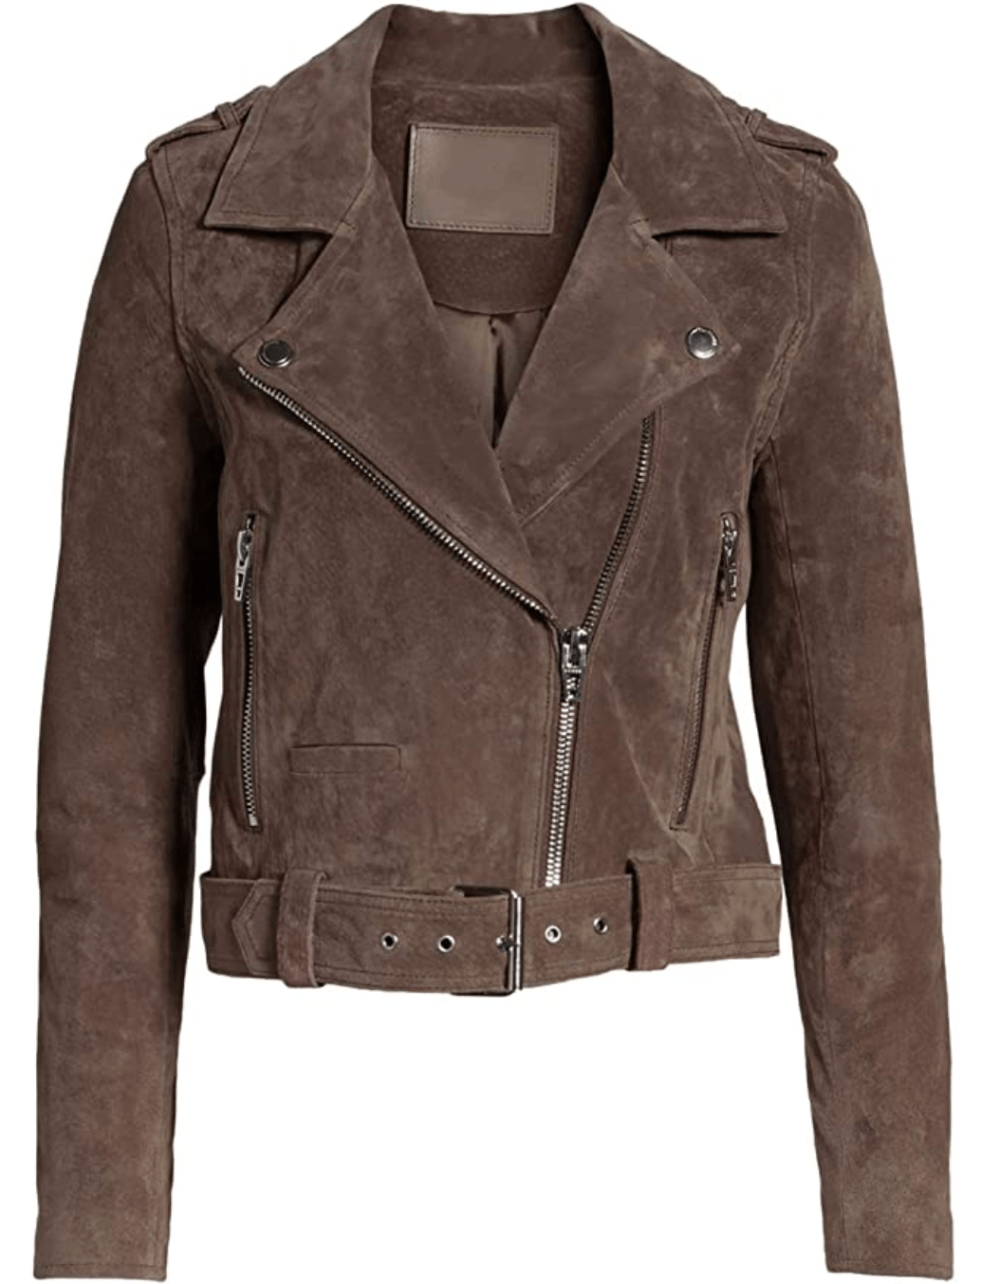 Blibea Soft Faux Suede Moto Jacket Is Impressing Tons of Shoppers ...